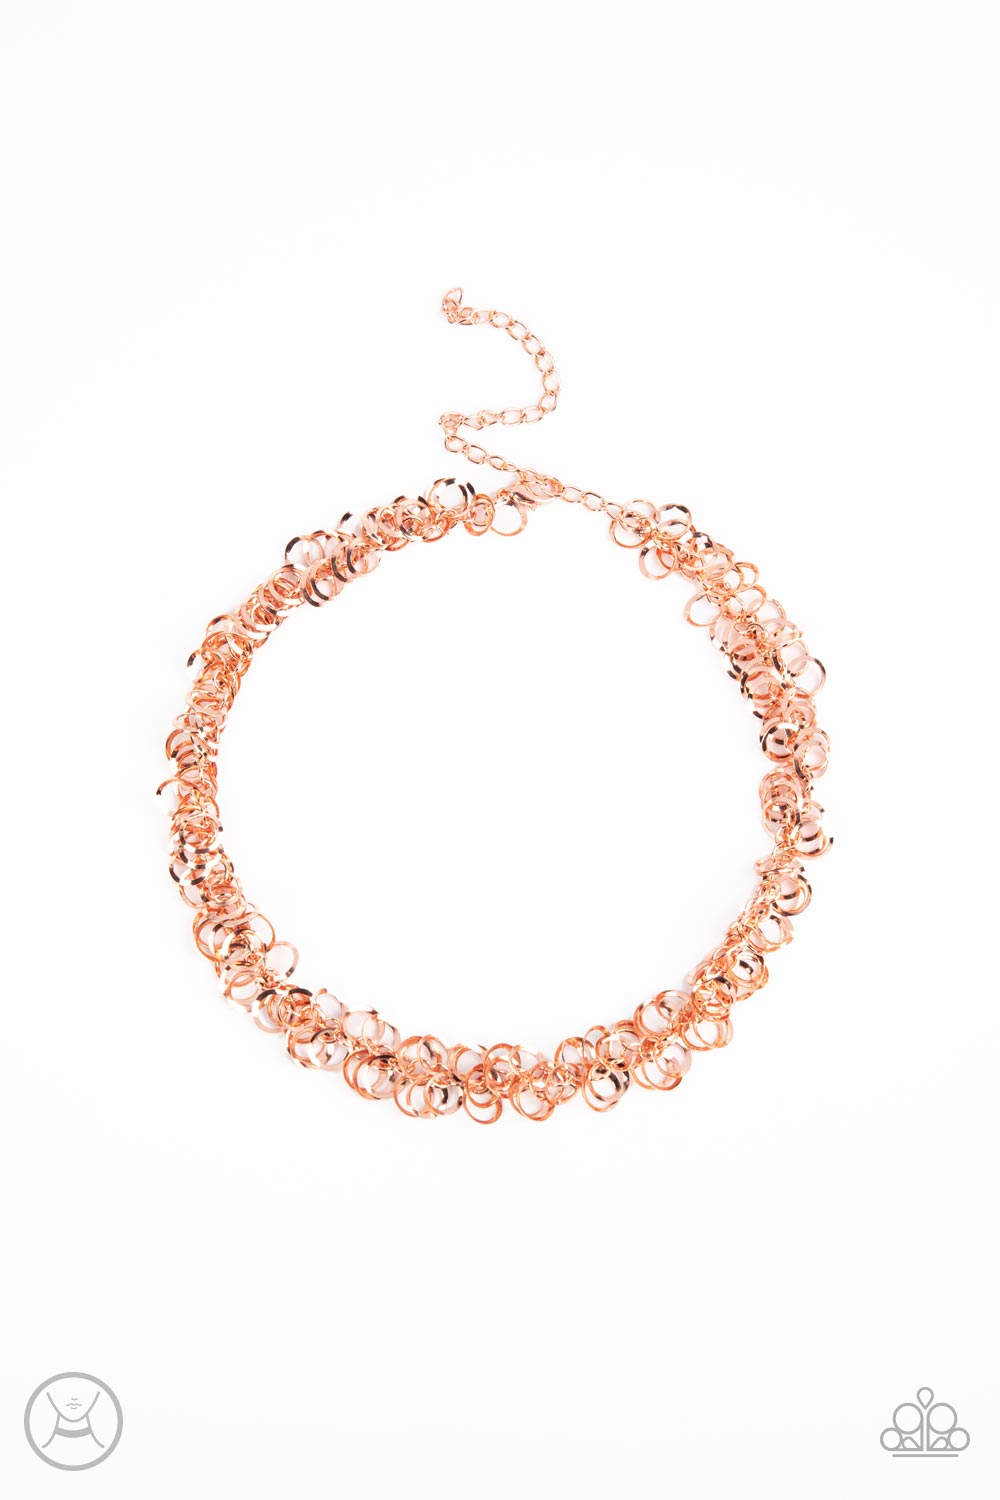 Cause a Commotion - Copper Choker Necklace